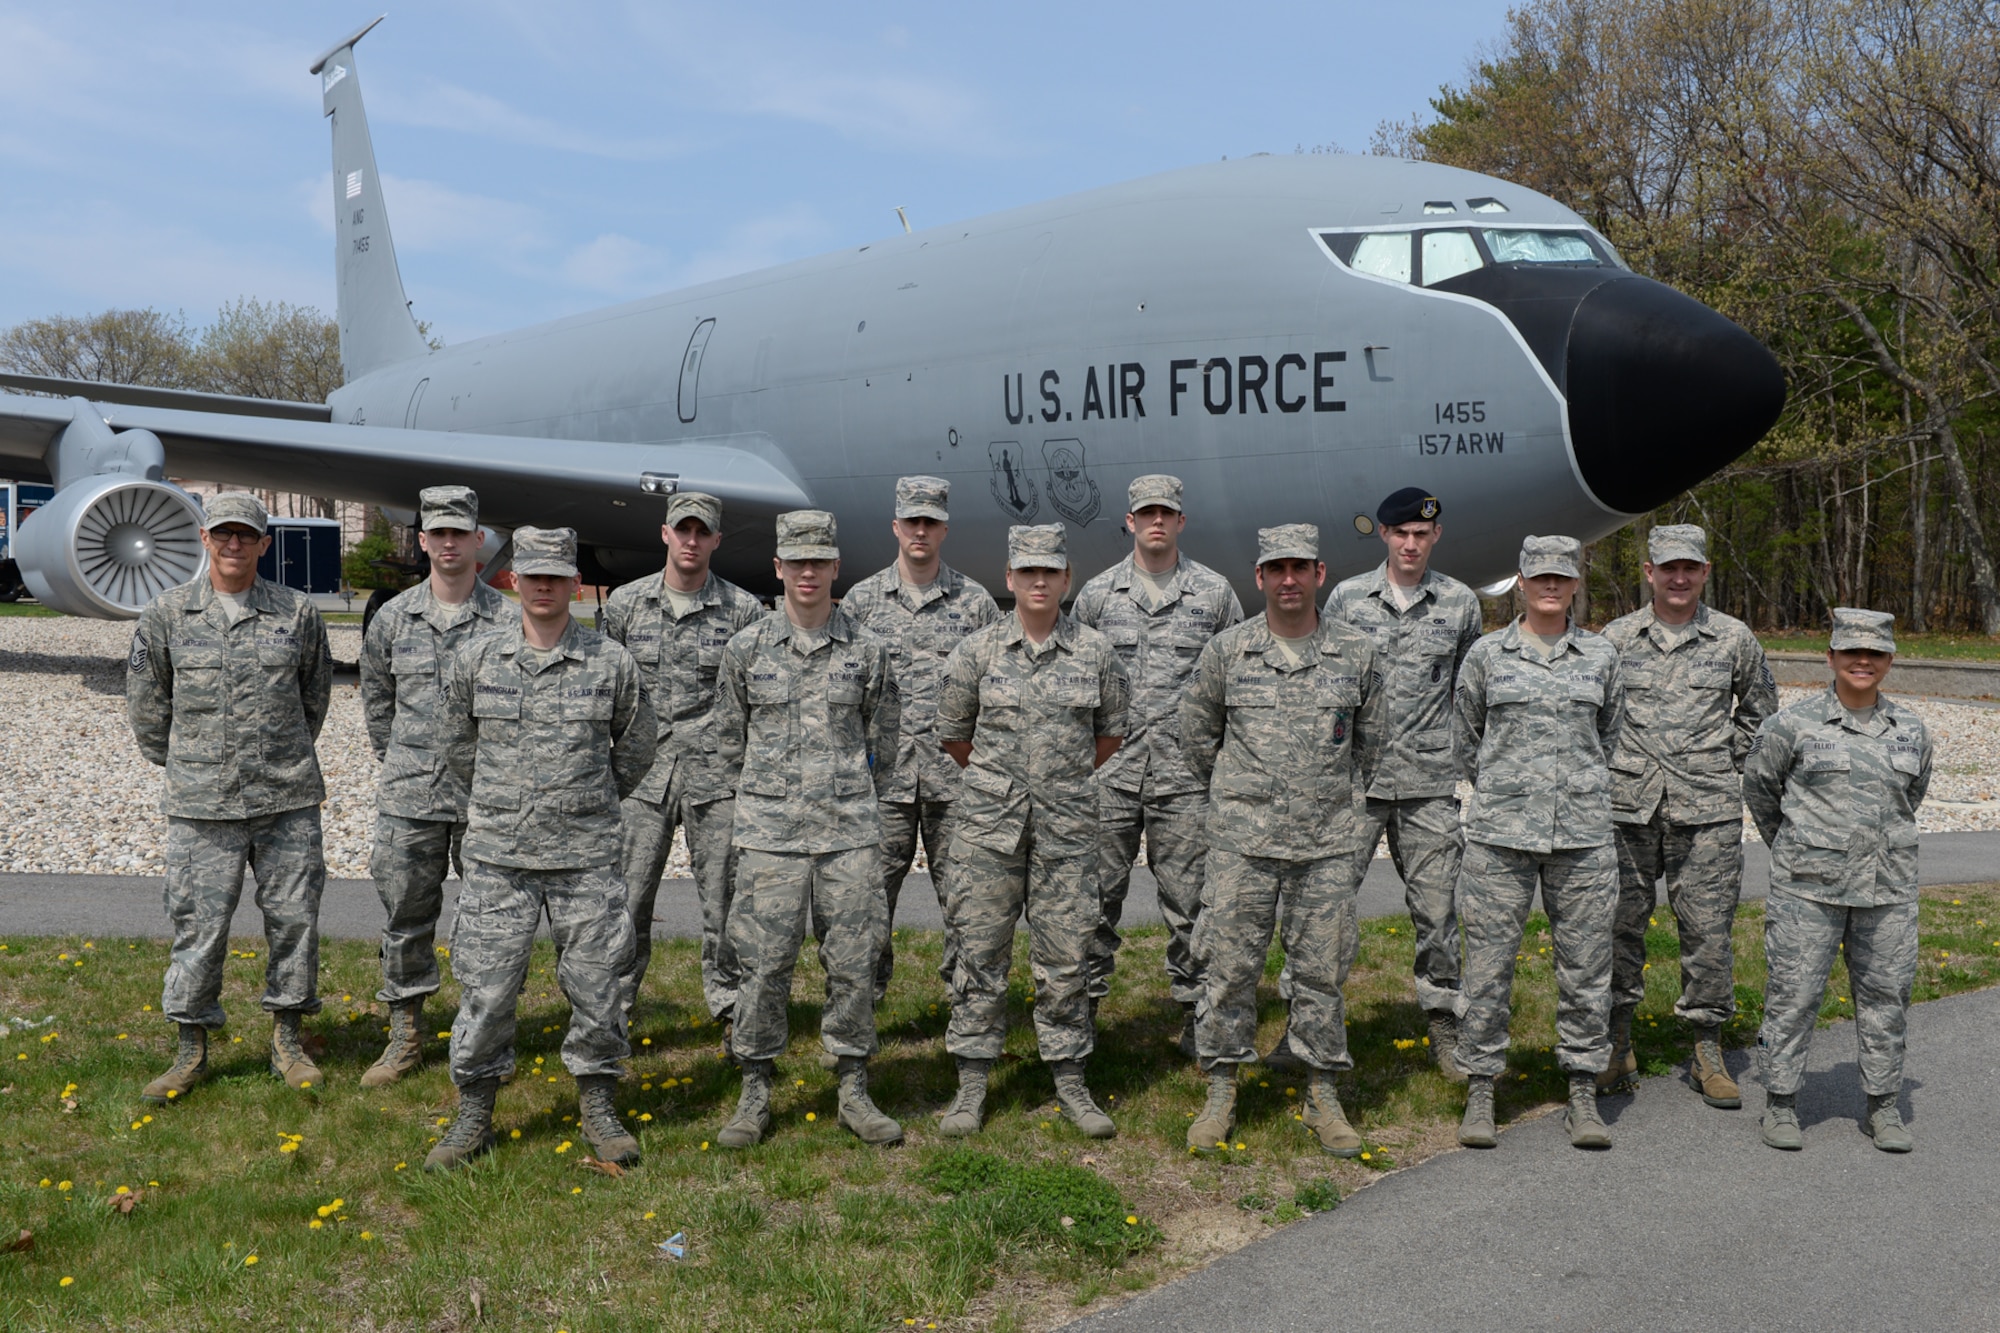 Airmen attending Satellite Airman Leadership School pose for a class photo at Pease Air National Guard Base, N.H. on May 9, 2015. (U.S. Air National Guard photo by Staff Sgt. Curtis J. Lenz)